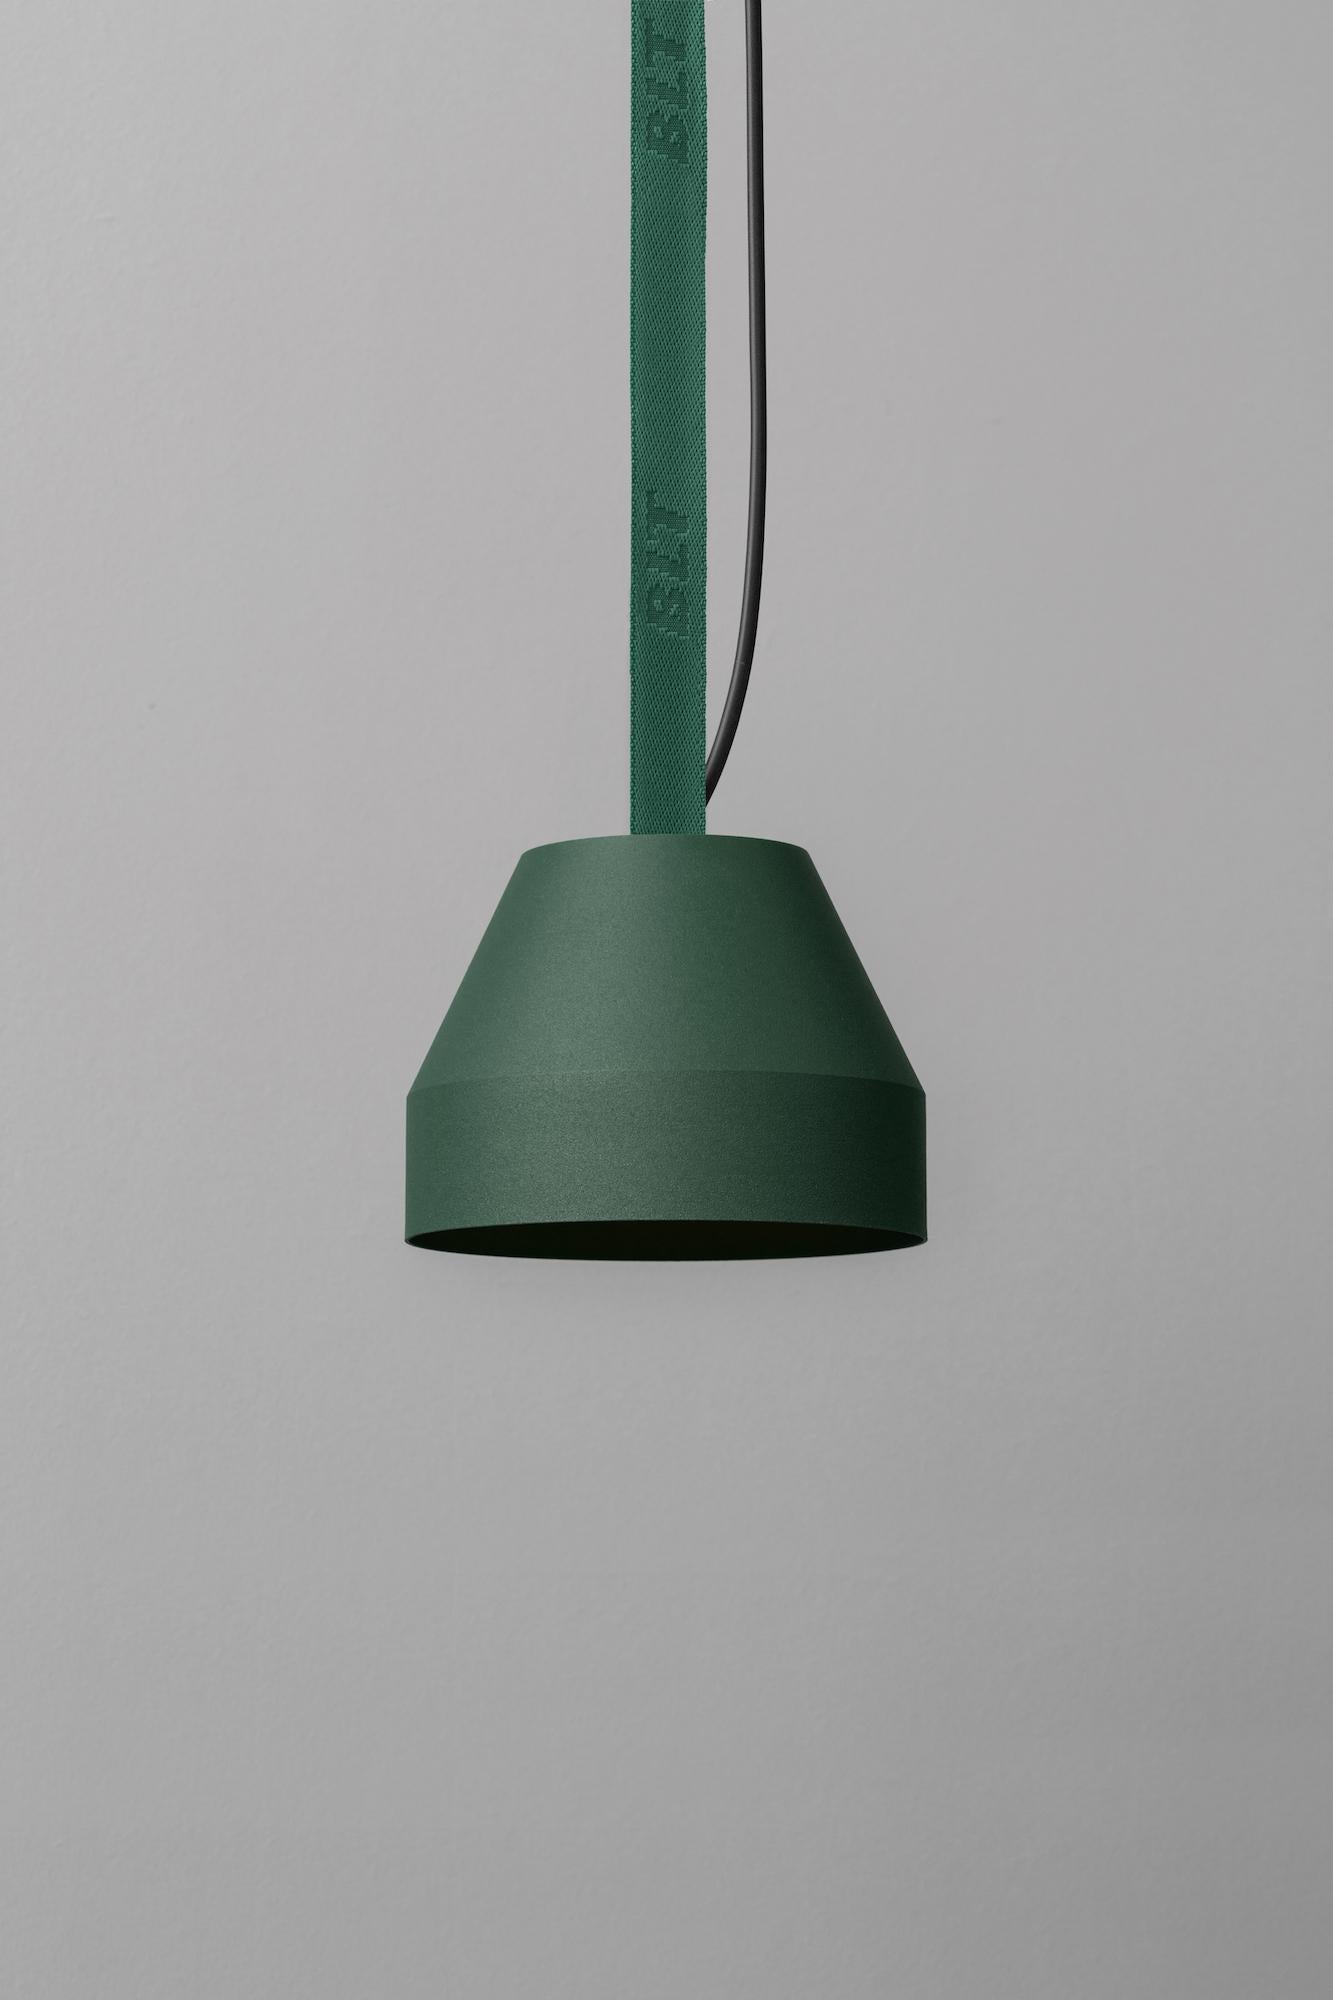 BLT_CAP Small Forest Pendant Lamp by +kouple
Dimensions: Ø 16 x H 12 cm. 
Materials: Powder-coated steel and textile.

Available in different color options. The rod length is 250 cm. Please contact us.

All our lamps can be wired according to each